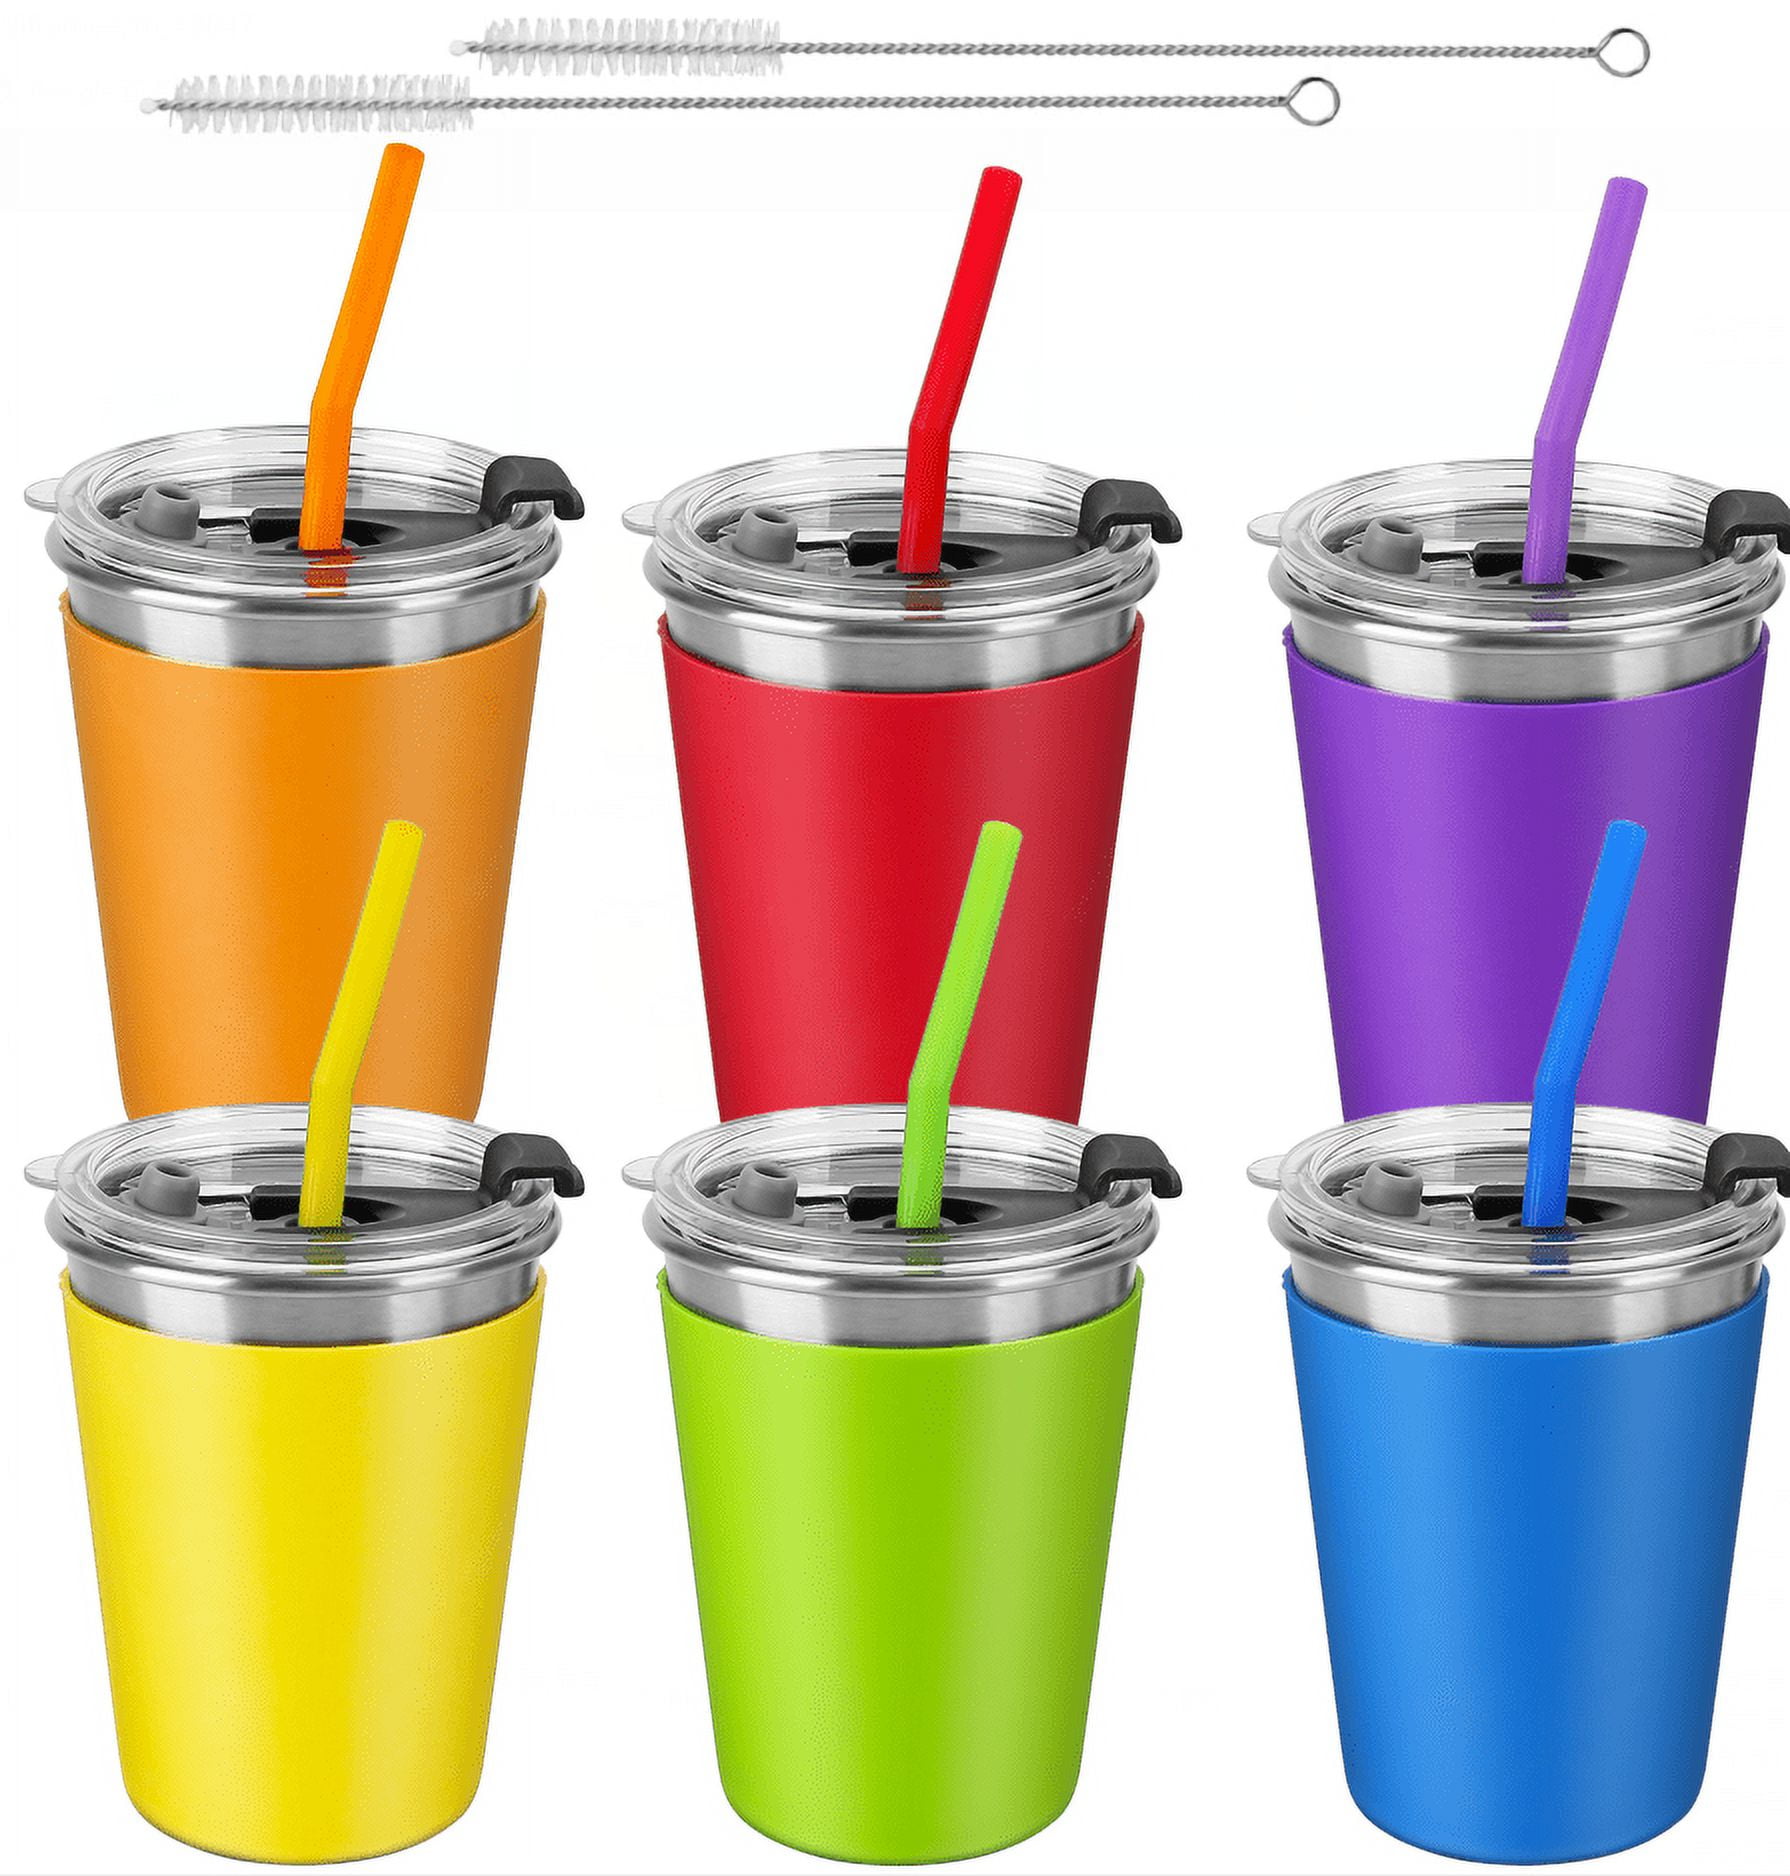 Stainless Steel Kids Cups with Straws and Lids,16oz Spill Proof